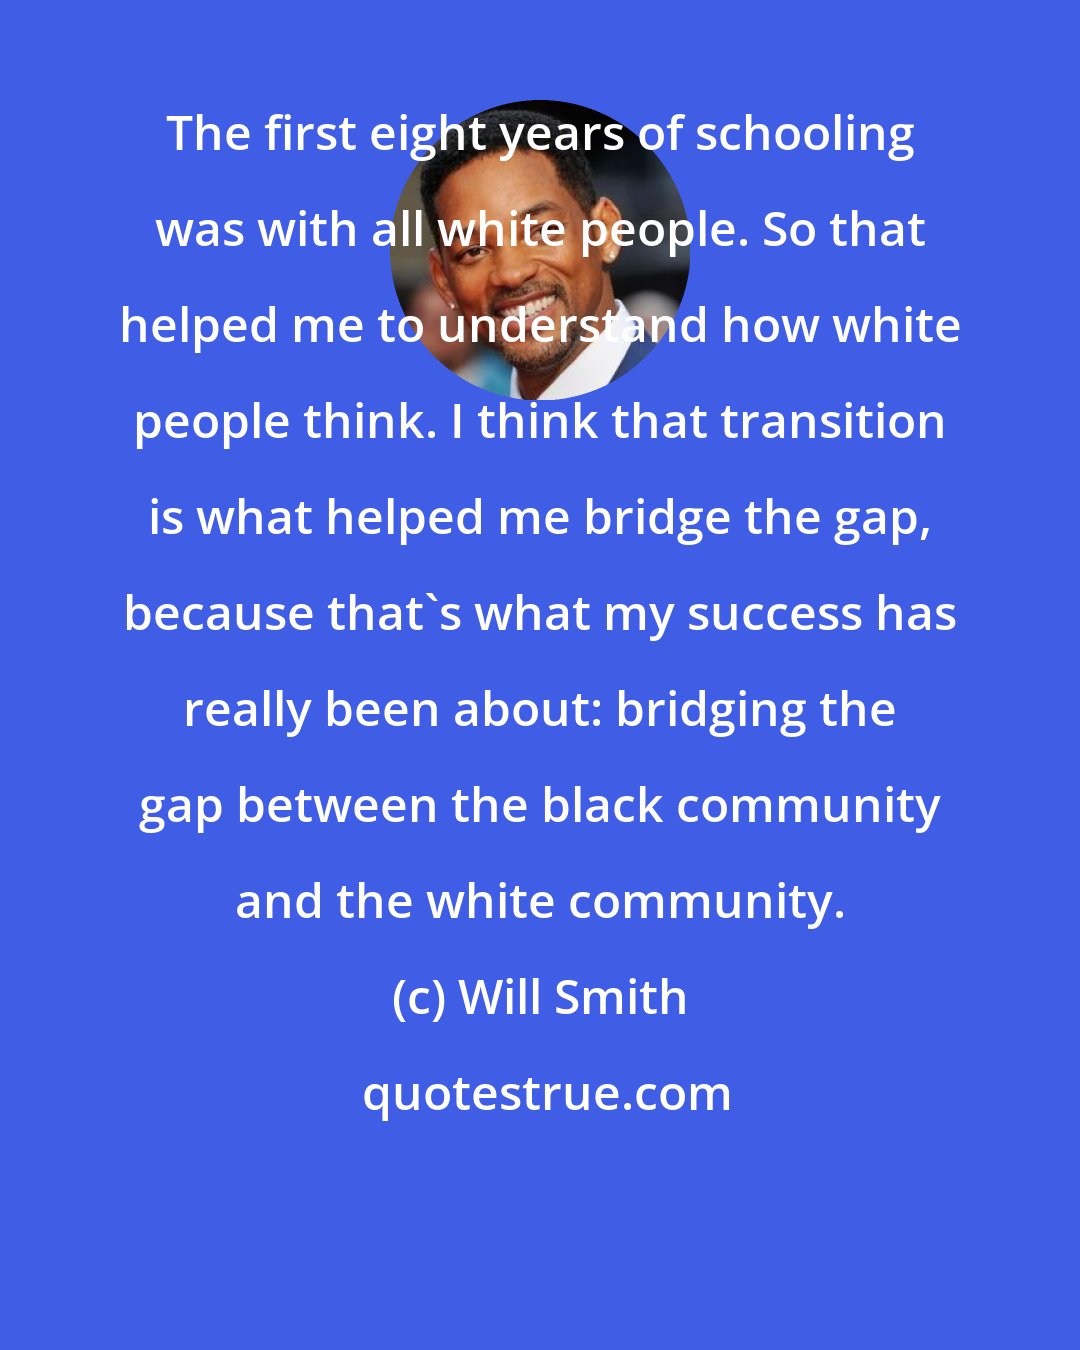 Will Smith: The first eight years of schooling was with all white people. So that helped me to understand how white people think. I think that transition is what helped me bridge the gap, because that's what my success has really been about: bridging the gap between the black community and the white community.